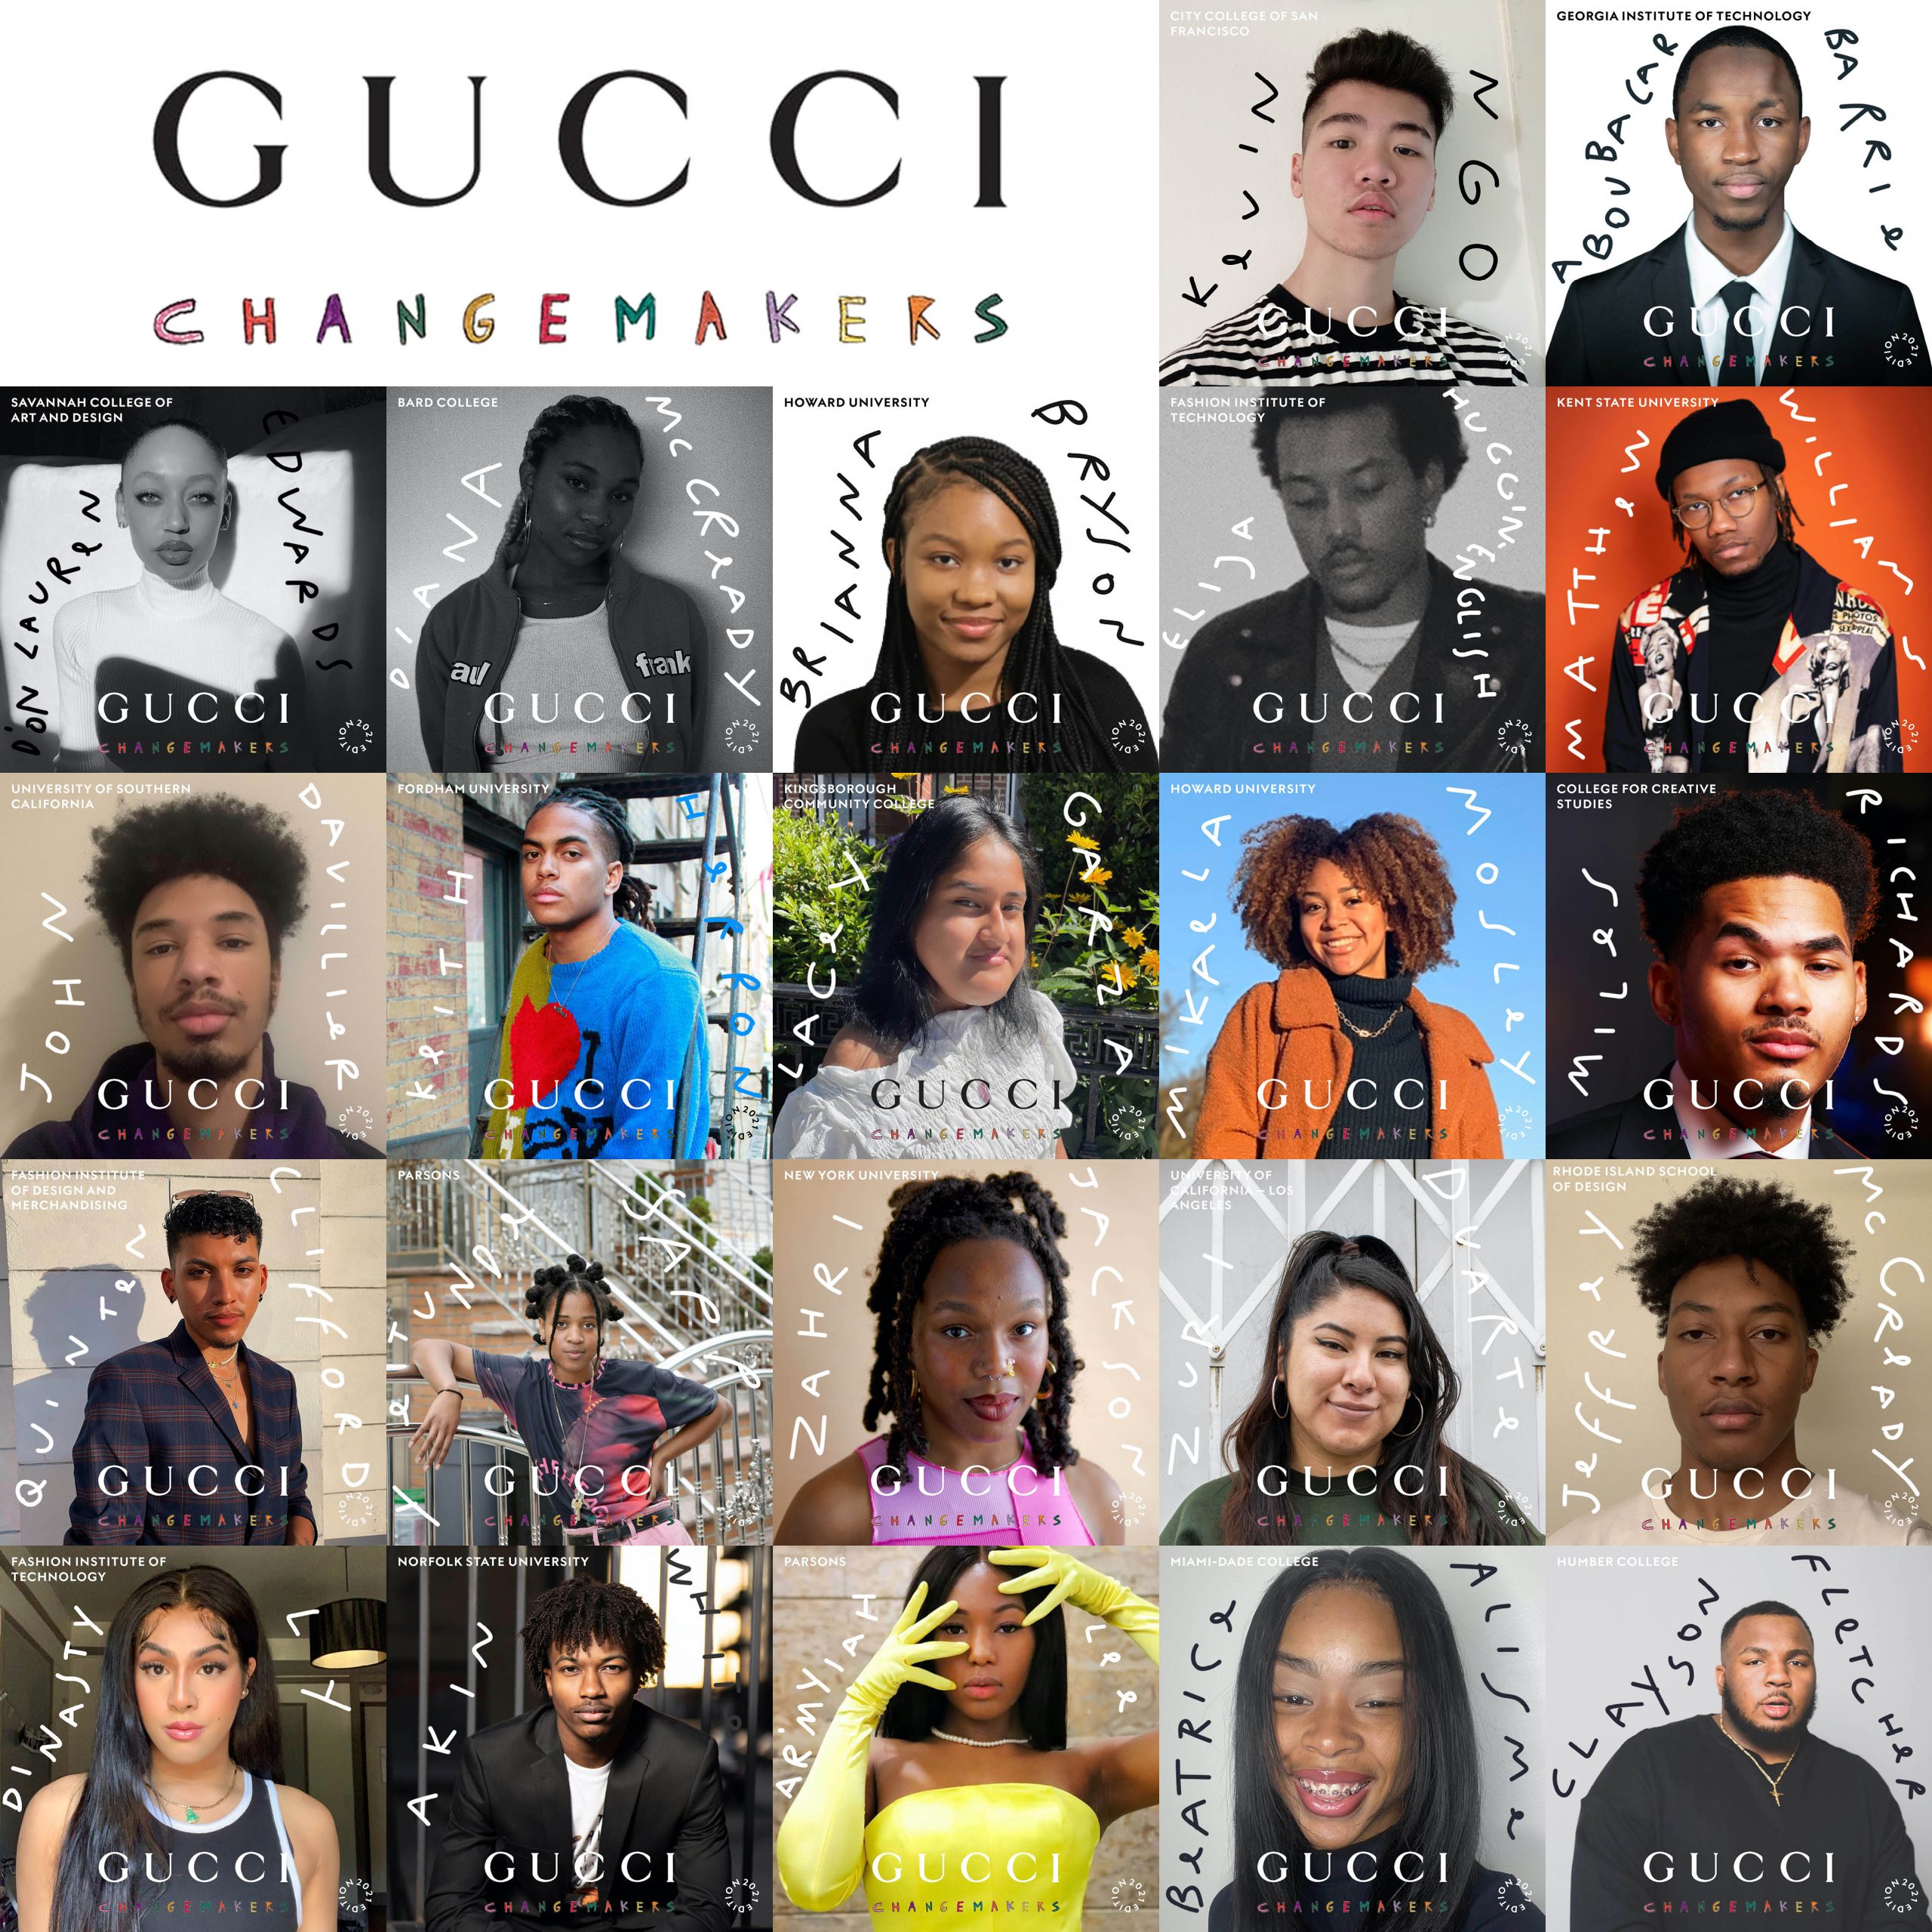 folder Analytiker Bloodstained Gucci Announces 2021 North America Changemakers Scholars – Gucci Equilibrium